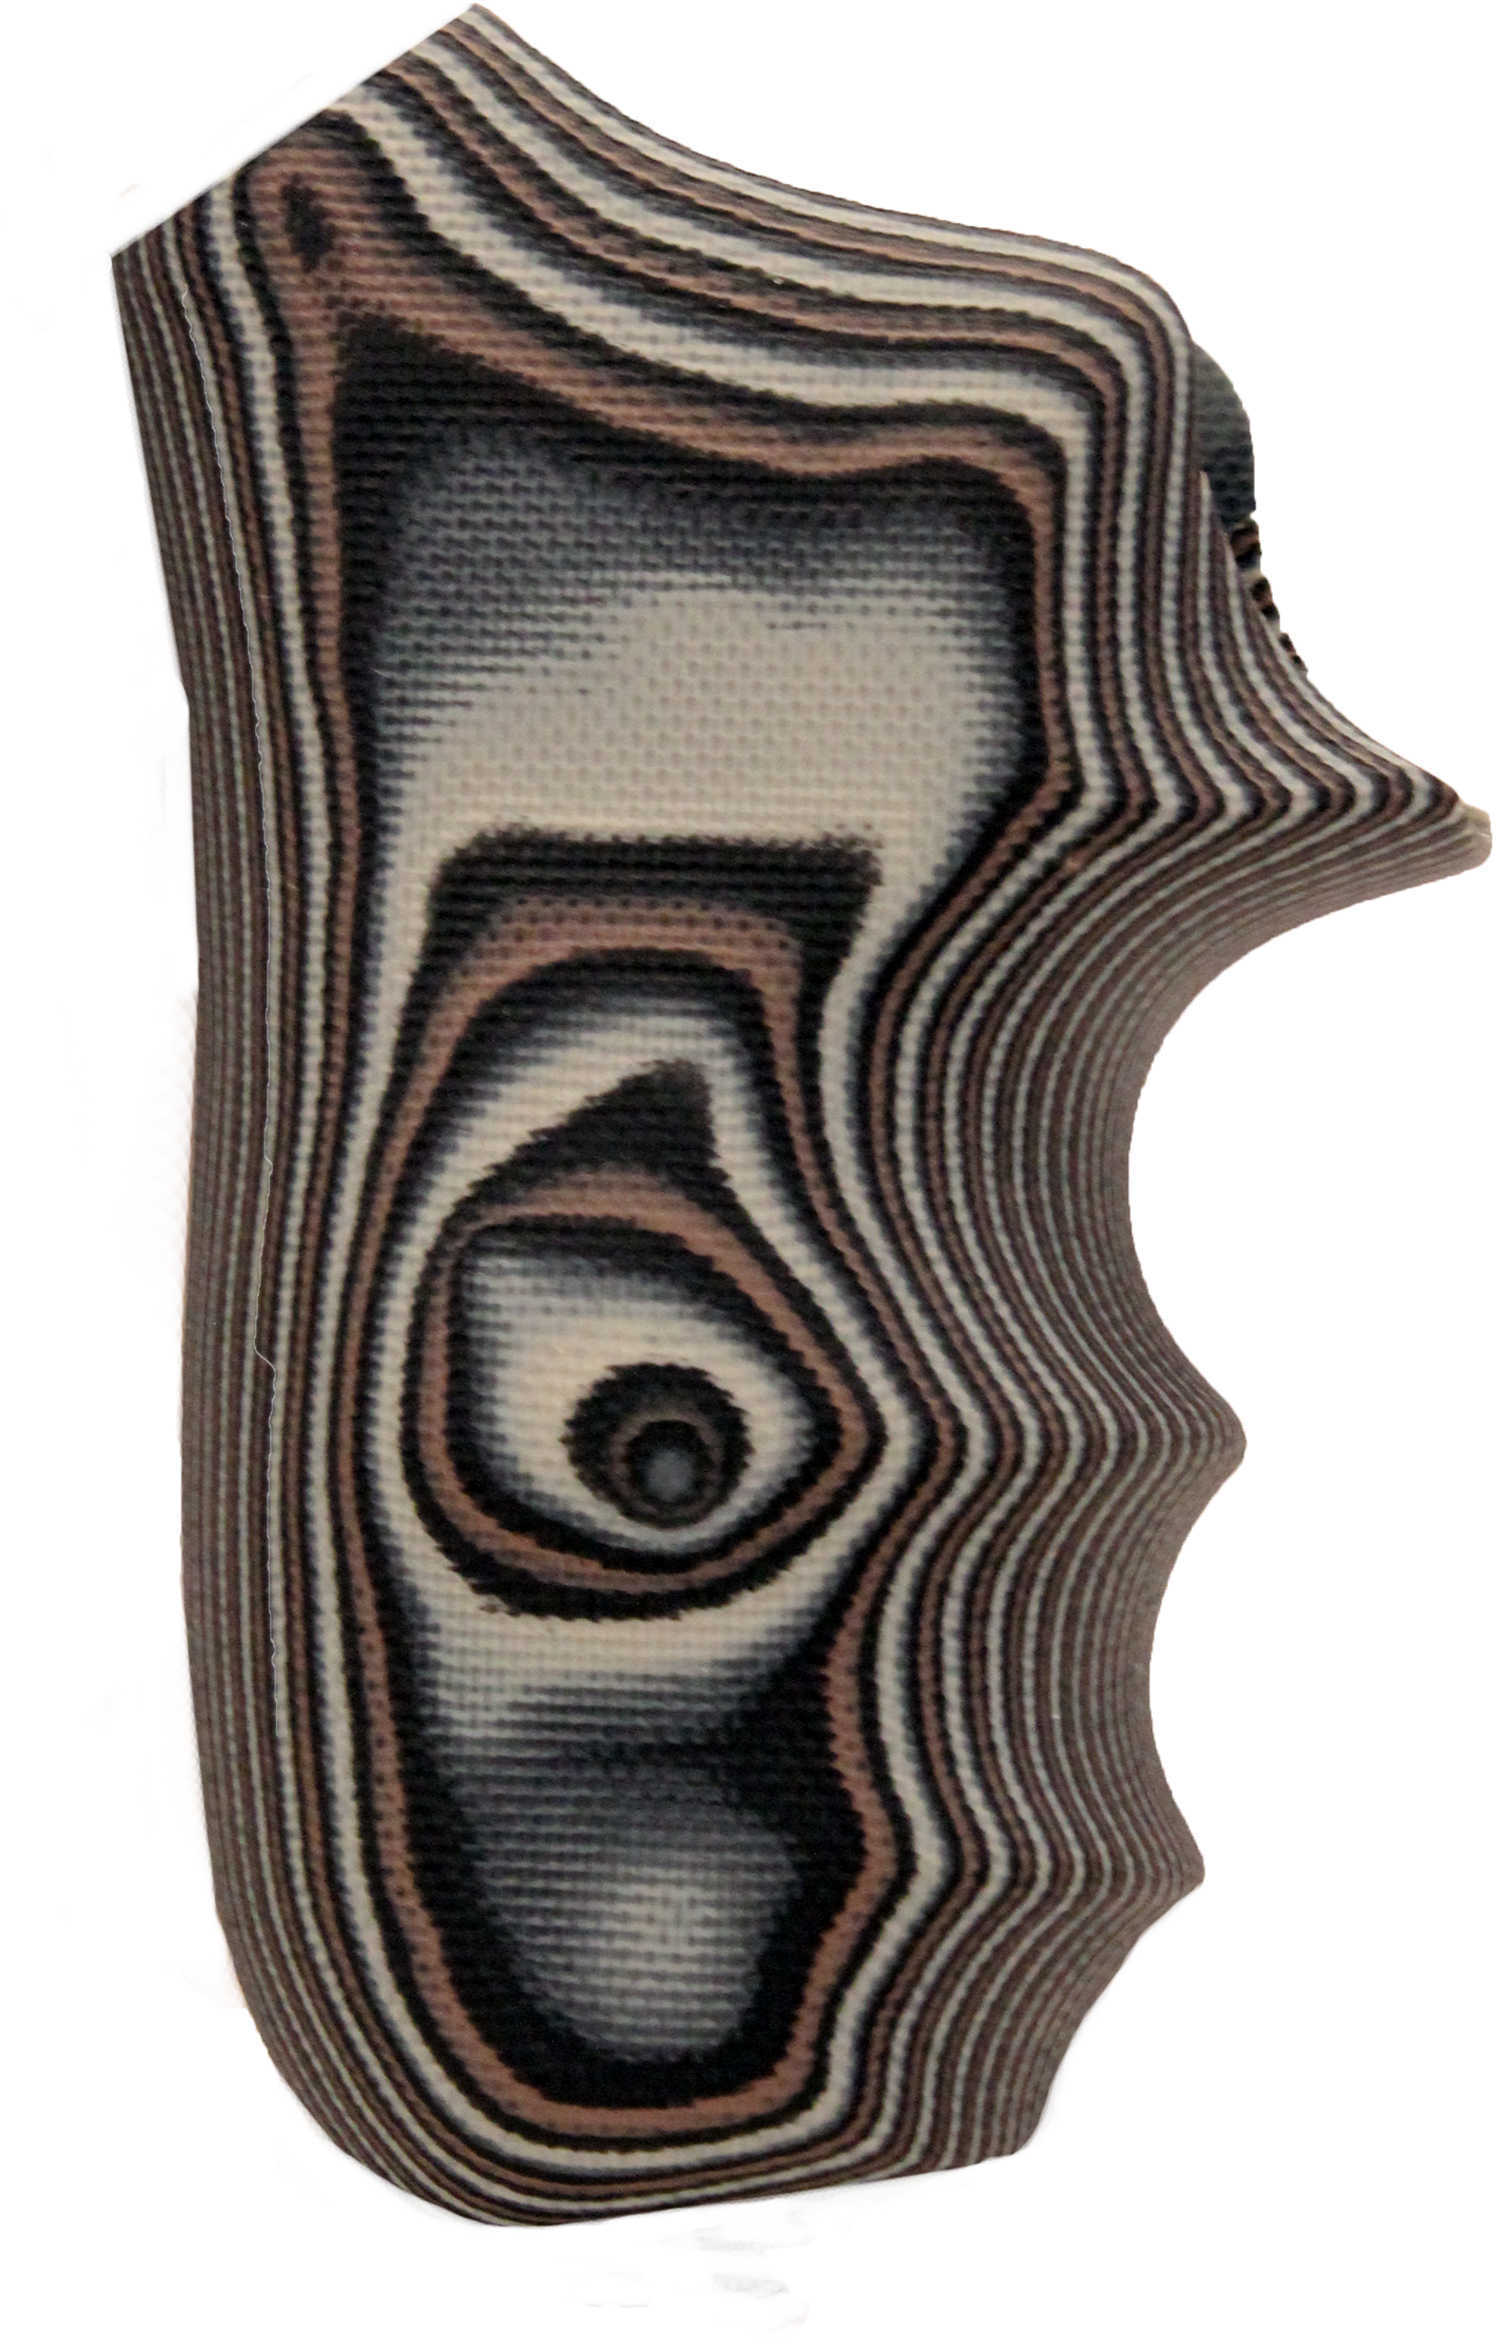 Hogue Ruger LCR Grip Enclosed Hammer, Smooth G10, G-Mascus Black/Grey Md: 78167